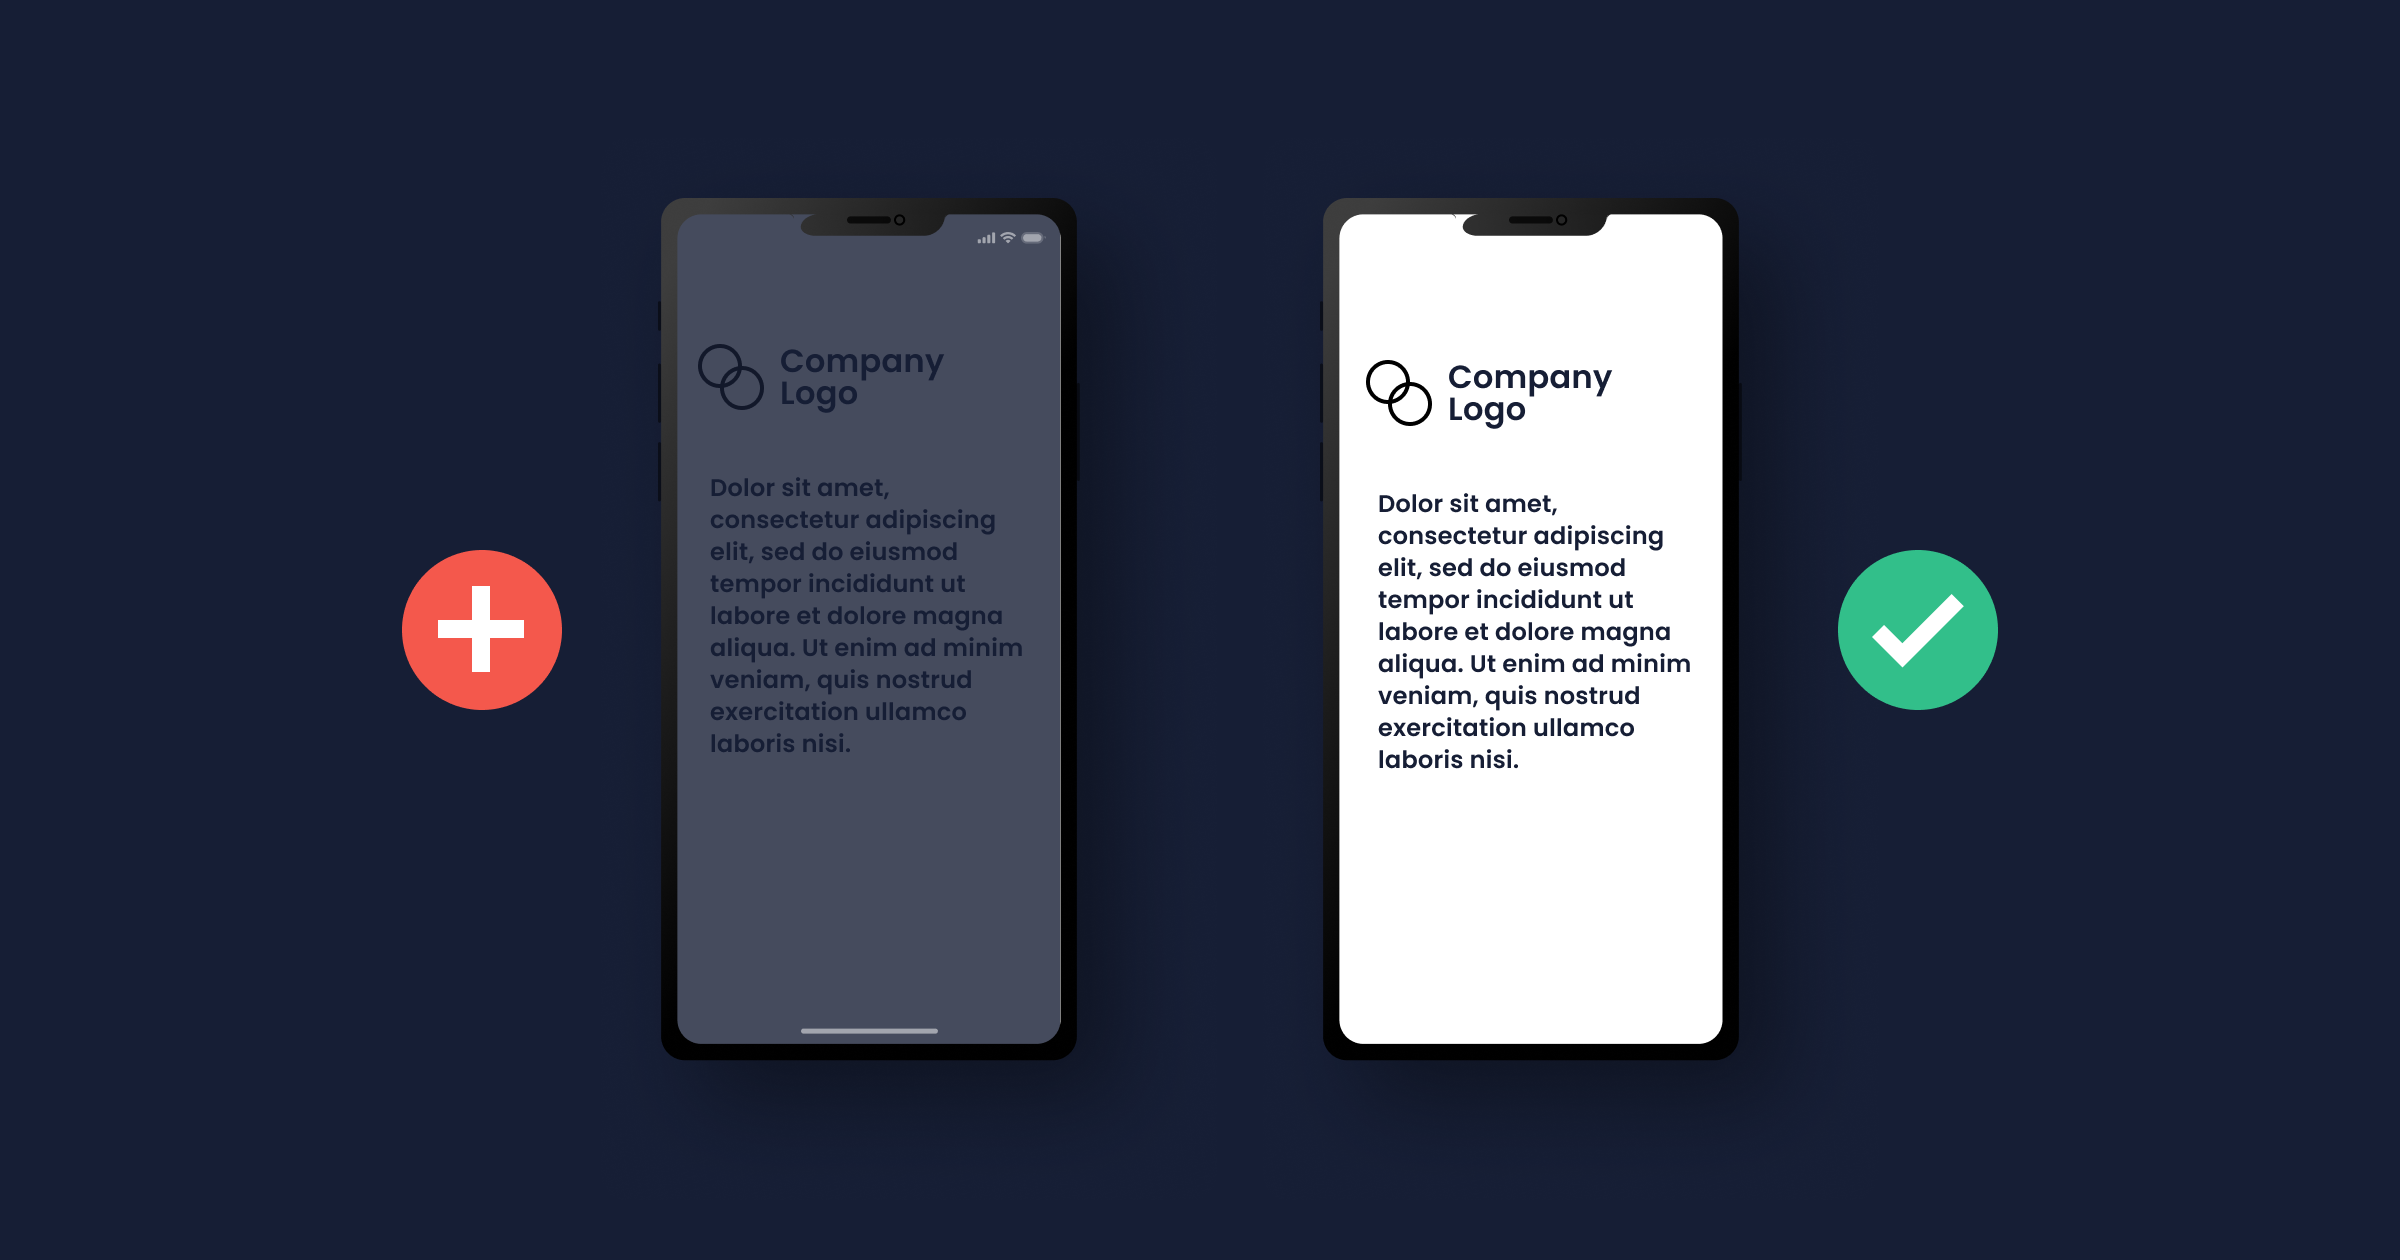 How to design for mobile